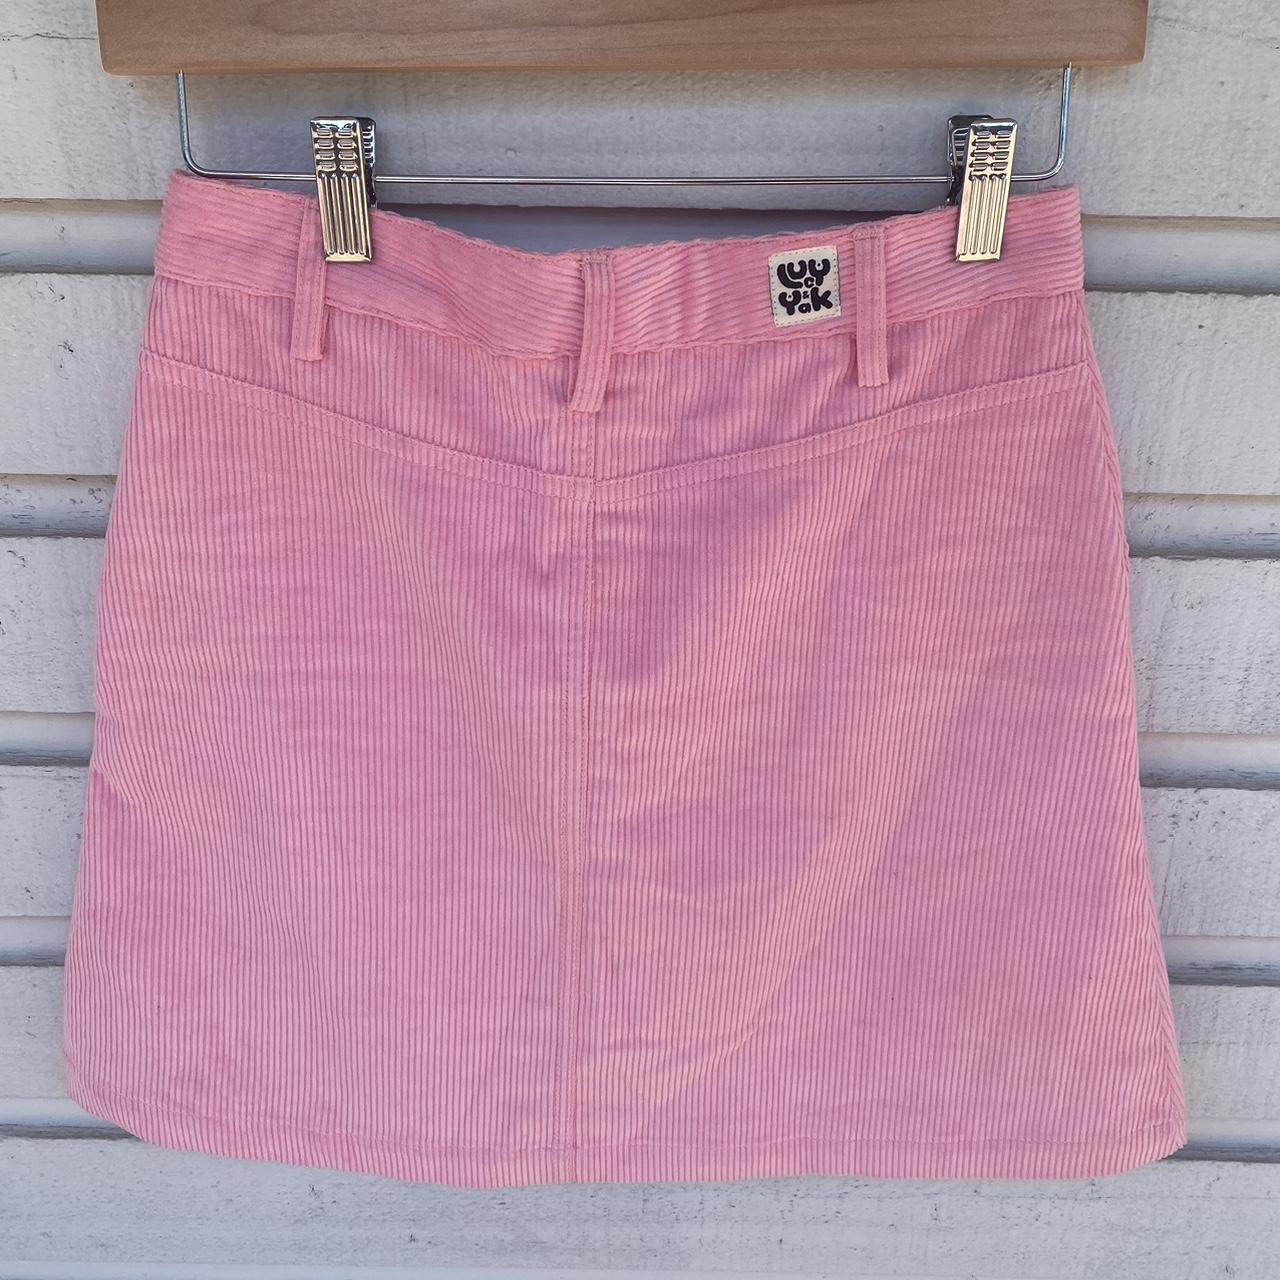 Lucy and Yak Women's Pink Skirt | Depop